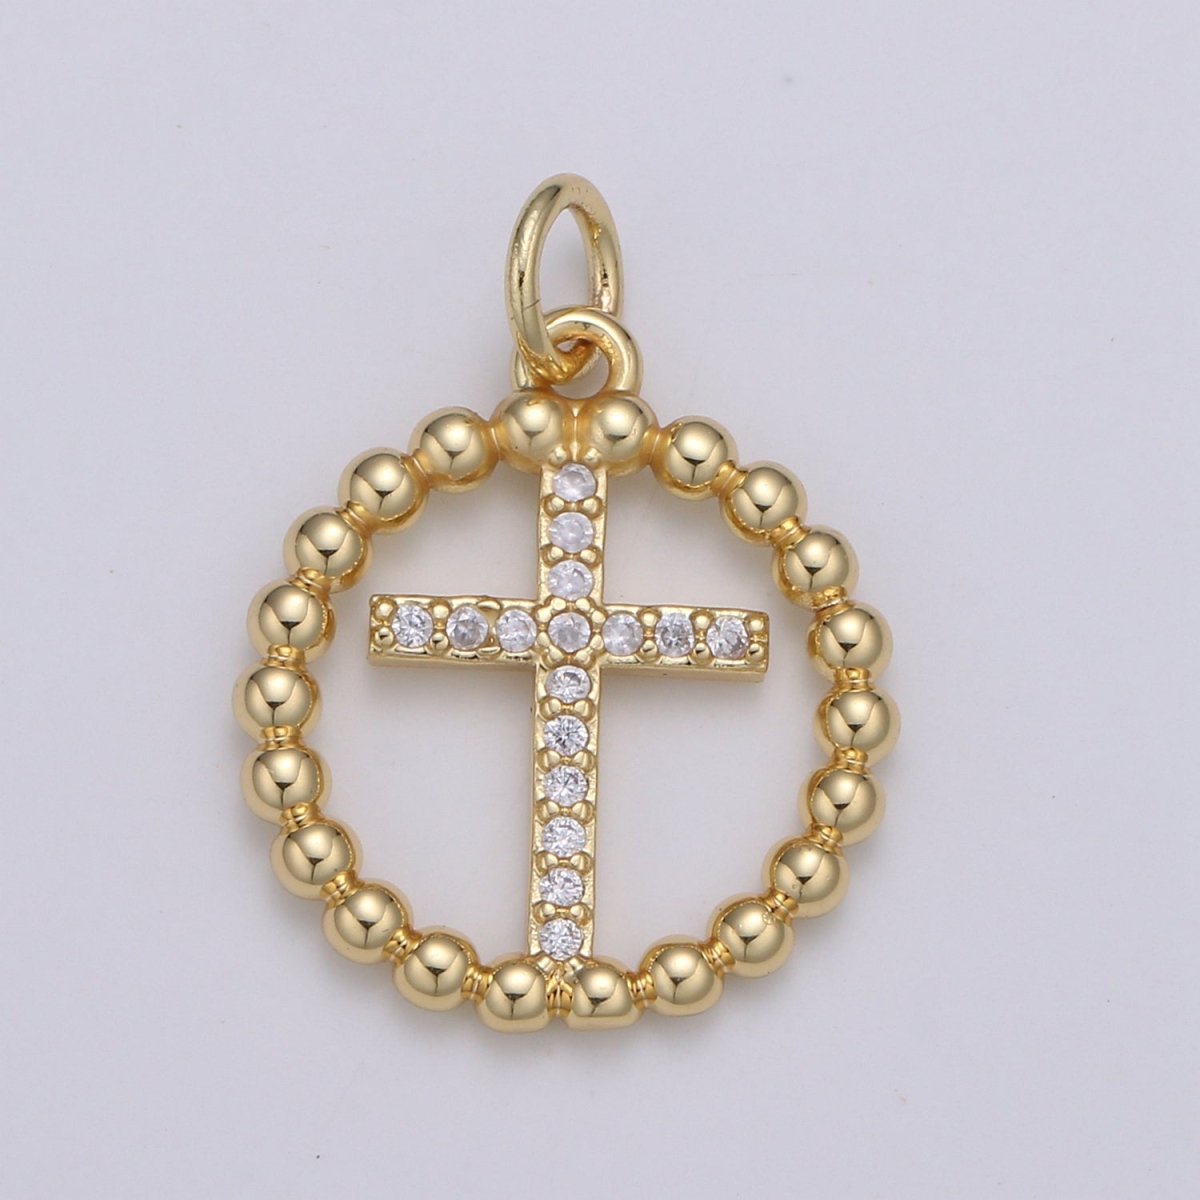 Gold Ball Chain Round Charm, Micro Pave Cz Circle Cross Pendant, 21x16mm geometric charm for necklace earring bracelet supply E-077 - DLUXCA